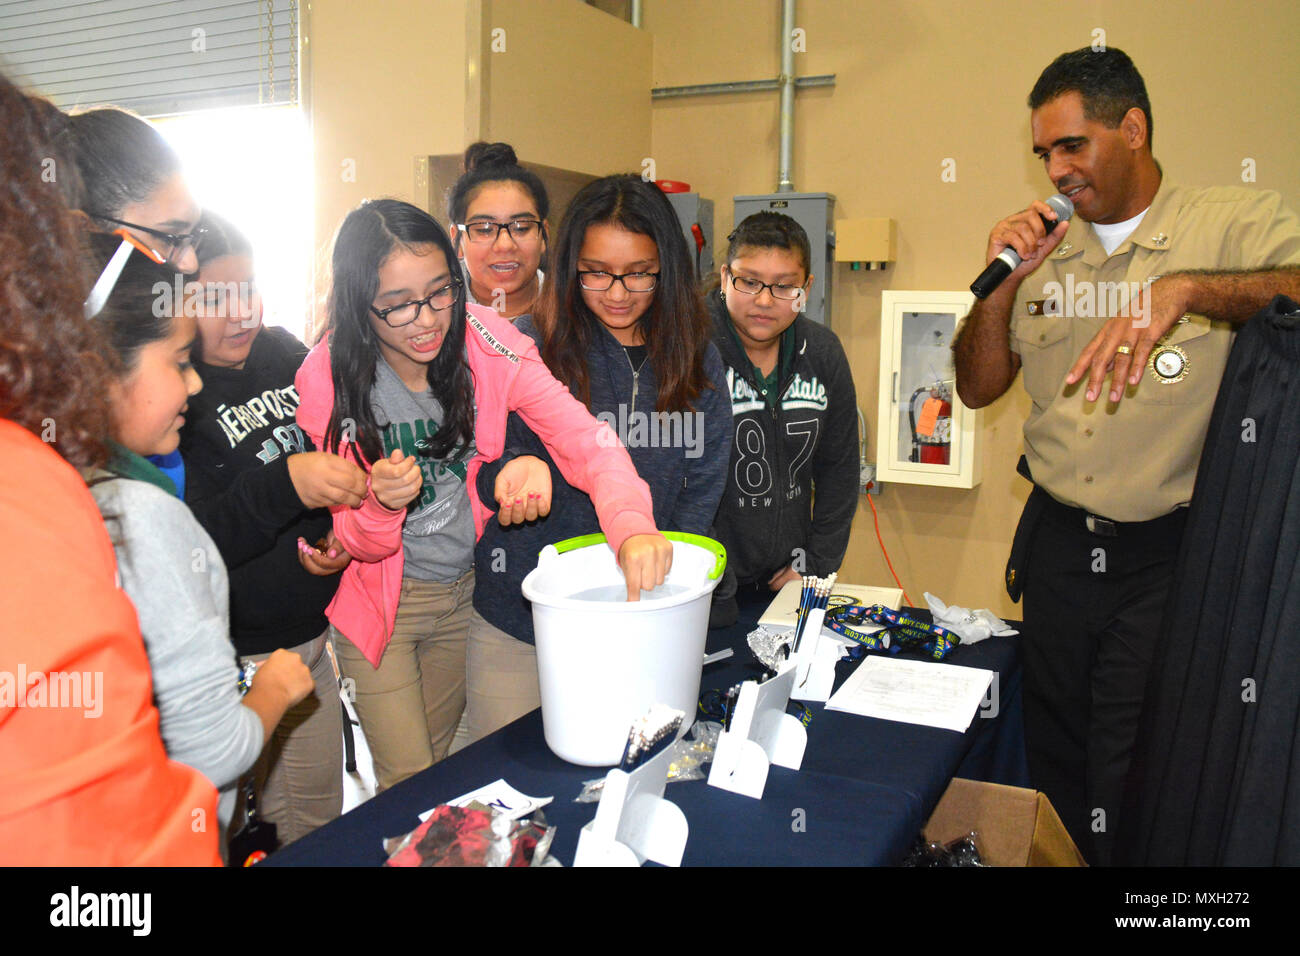 SAN ANTONIO - (Nov. 1, 2016) Harlem, N.Y. native, Petty Officer 1st Class Daniel Jimenez, a recruiter assigned to Navy Recruiting Station Ingram, Navy Recruiting District San Antonio, instructs middle school girls on the Penny Boat Challenge during the Hispanic Chamber of Commerce's CORE4 STEM Expo held at the Freeman Expo Hall.  Jimenez is a 1999 graduate of A. Philip Randolph High School in New York.  The expo, consisting an all-female day and all-male day, featured leaders from the energy, science, computer, and aerospace industries and presented students with the opportunity to meet with h Stock Photo